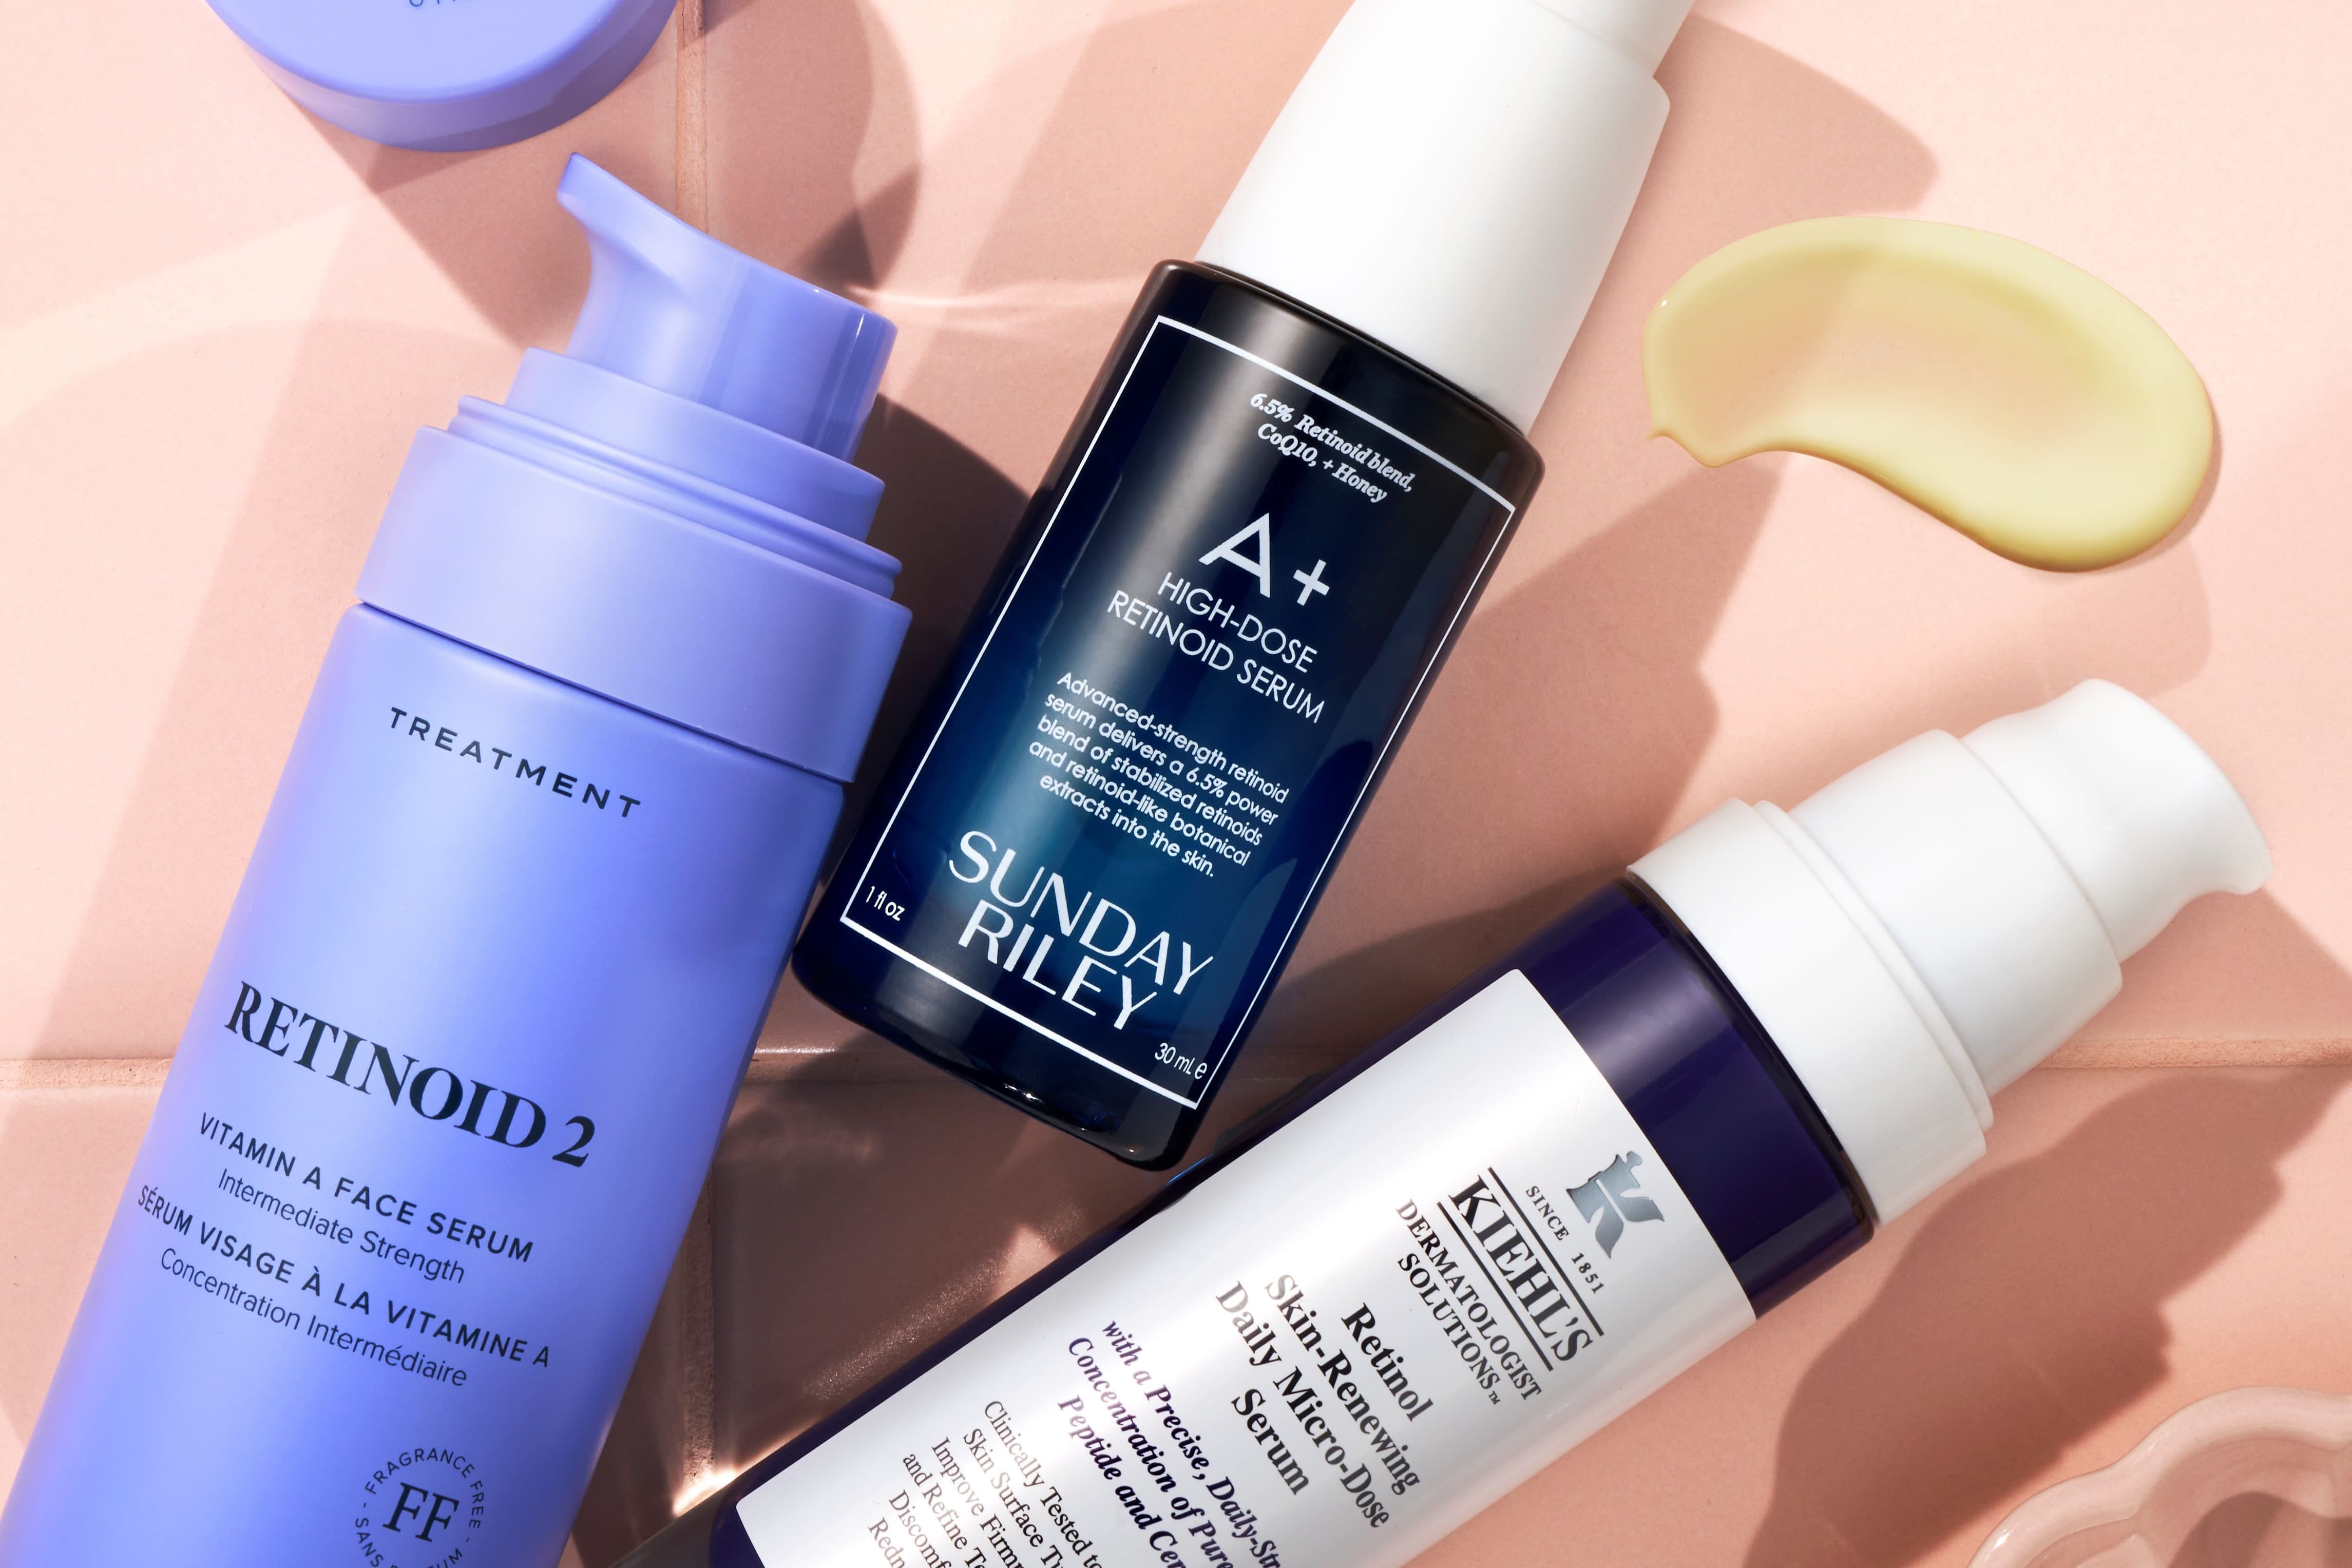 What Is Retinol And How Do You Use It?